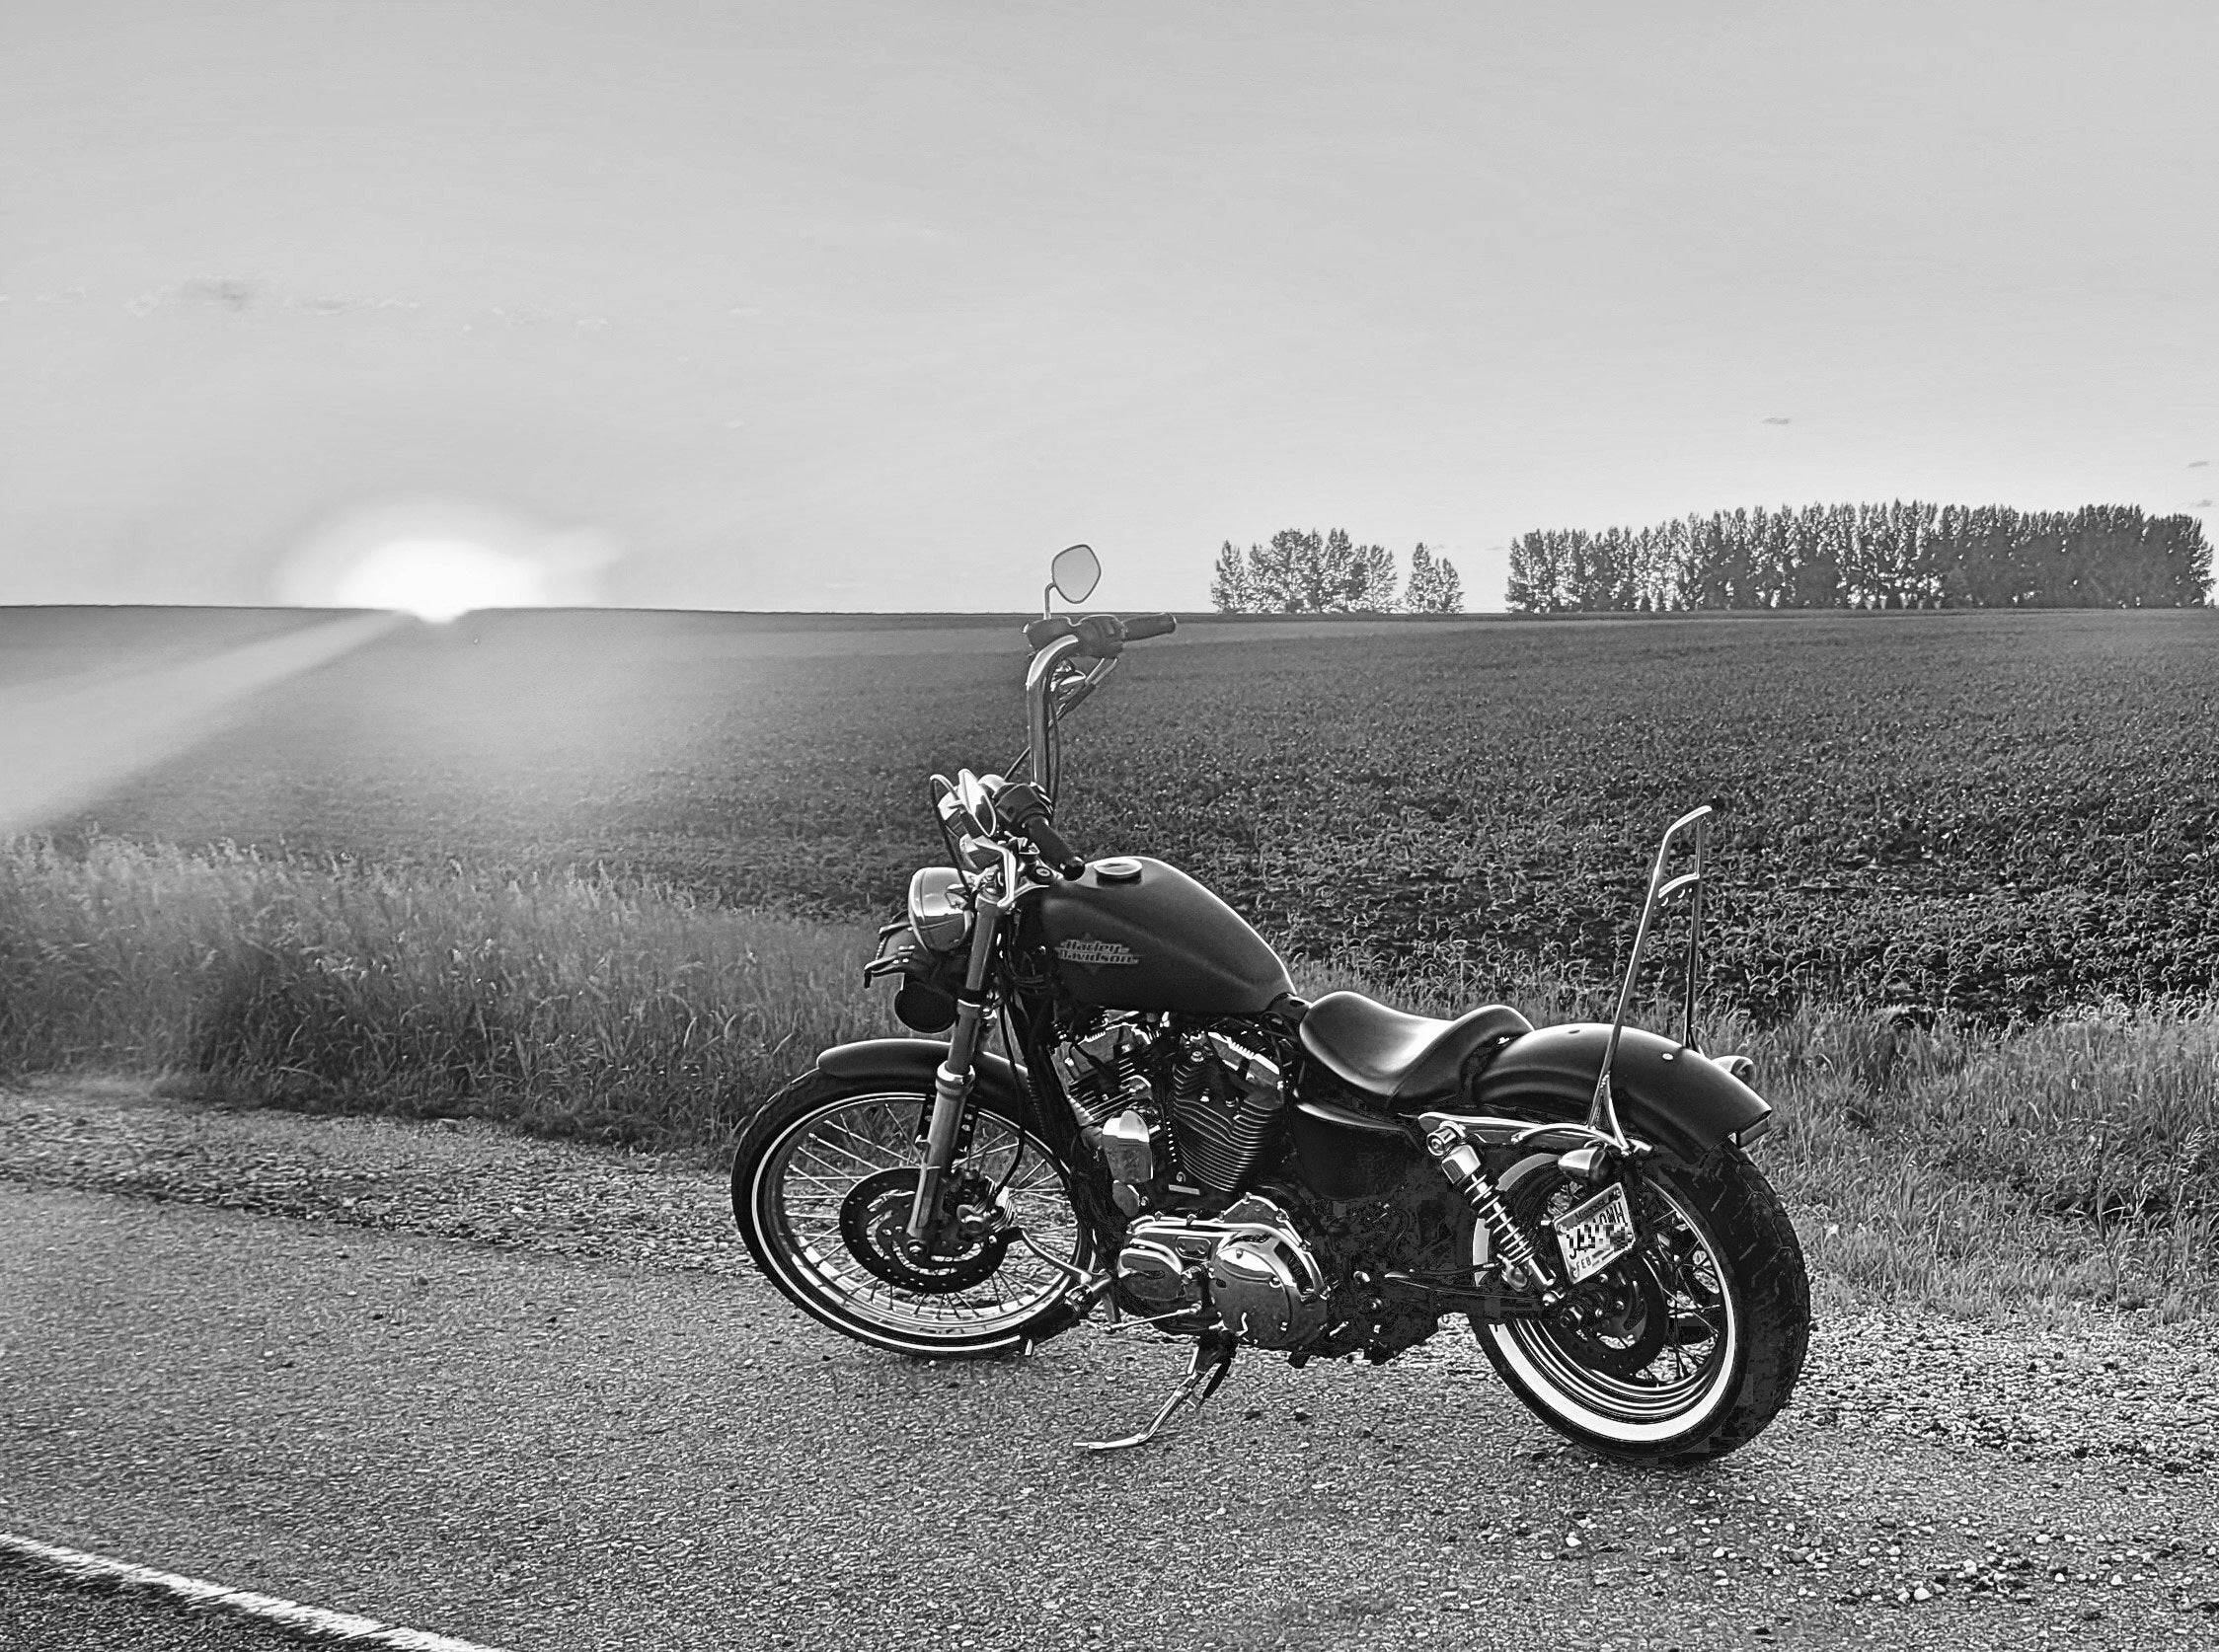 Harley Motorcycle on the side of the road